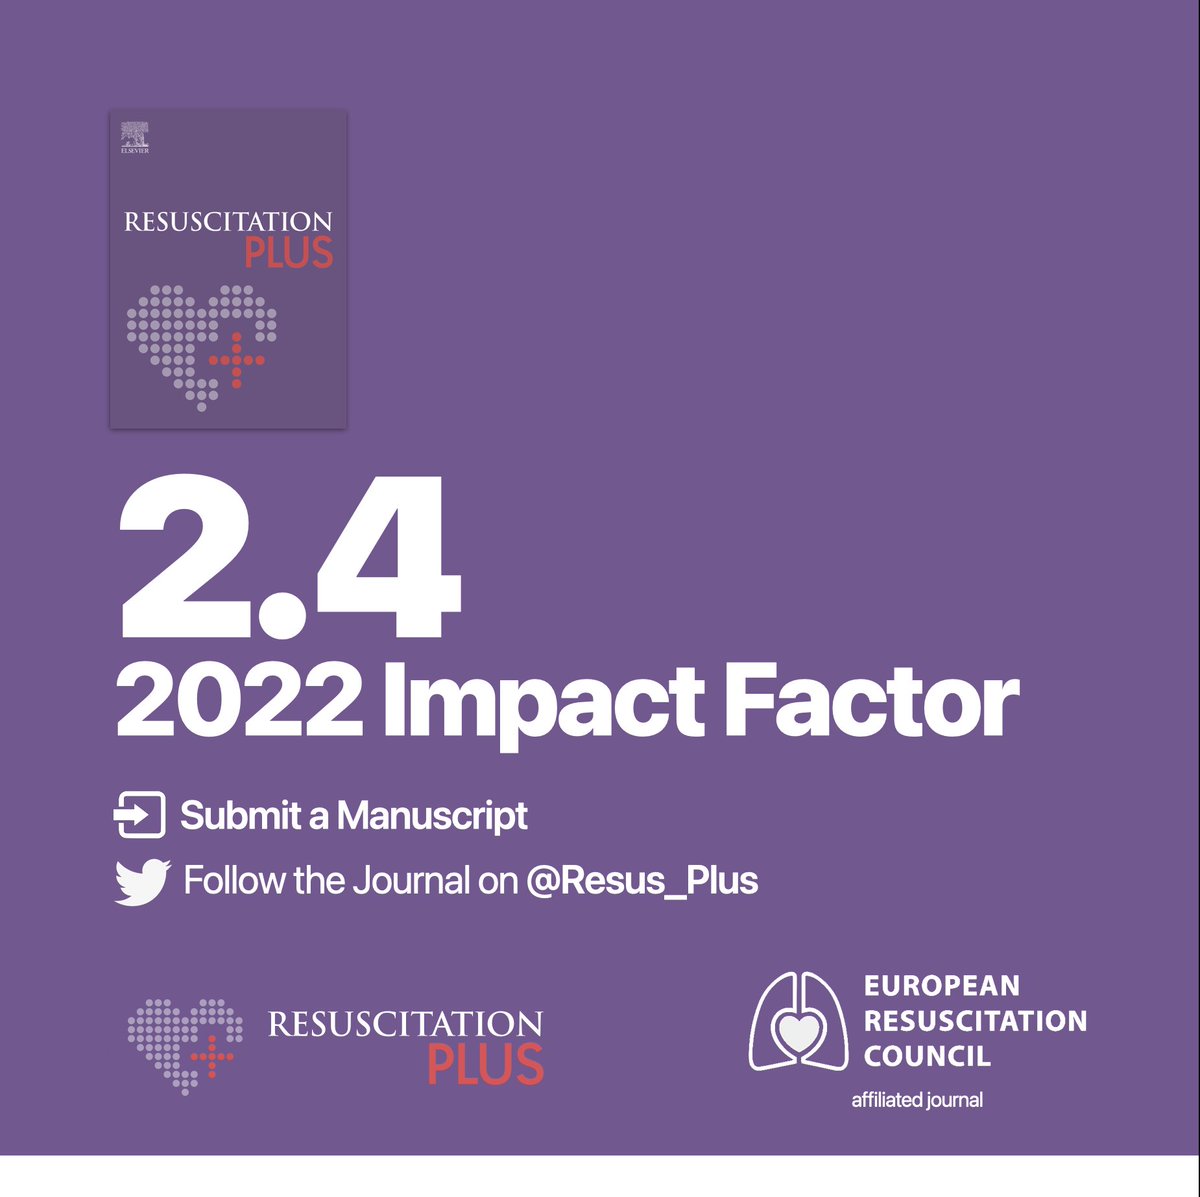 We are very pleased to announce that the 2022 Journal Impact Factors have been announced, and Resuscitation Plus has received its very first Impact Factor of 2.4.

#ResusTwitter